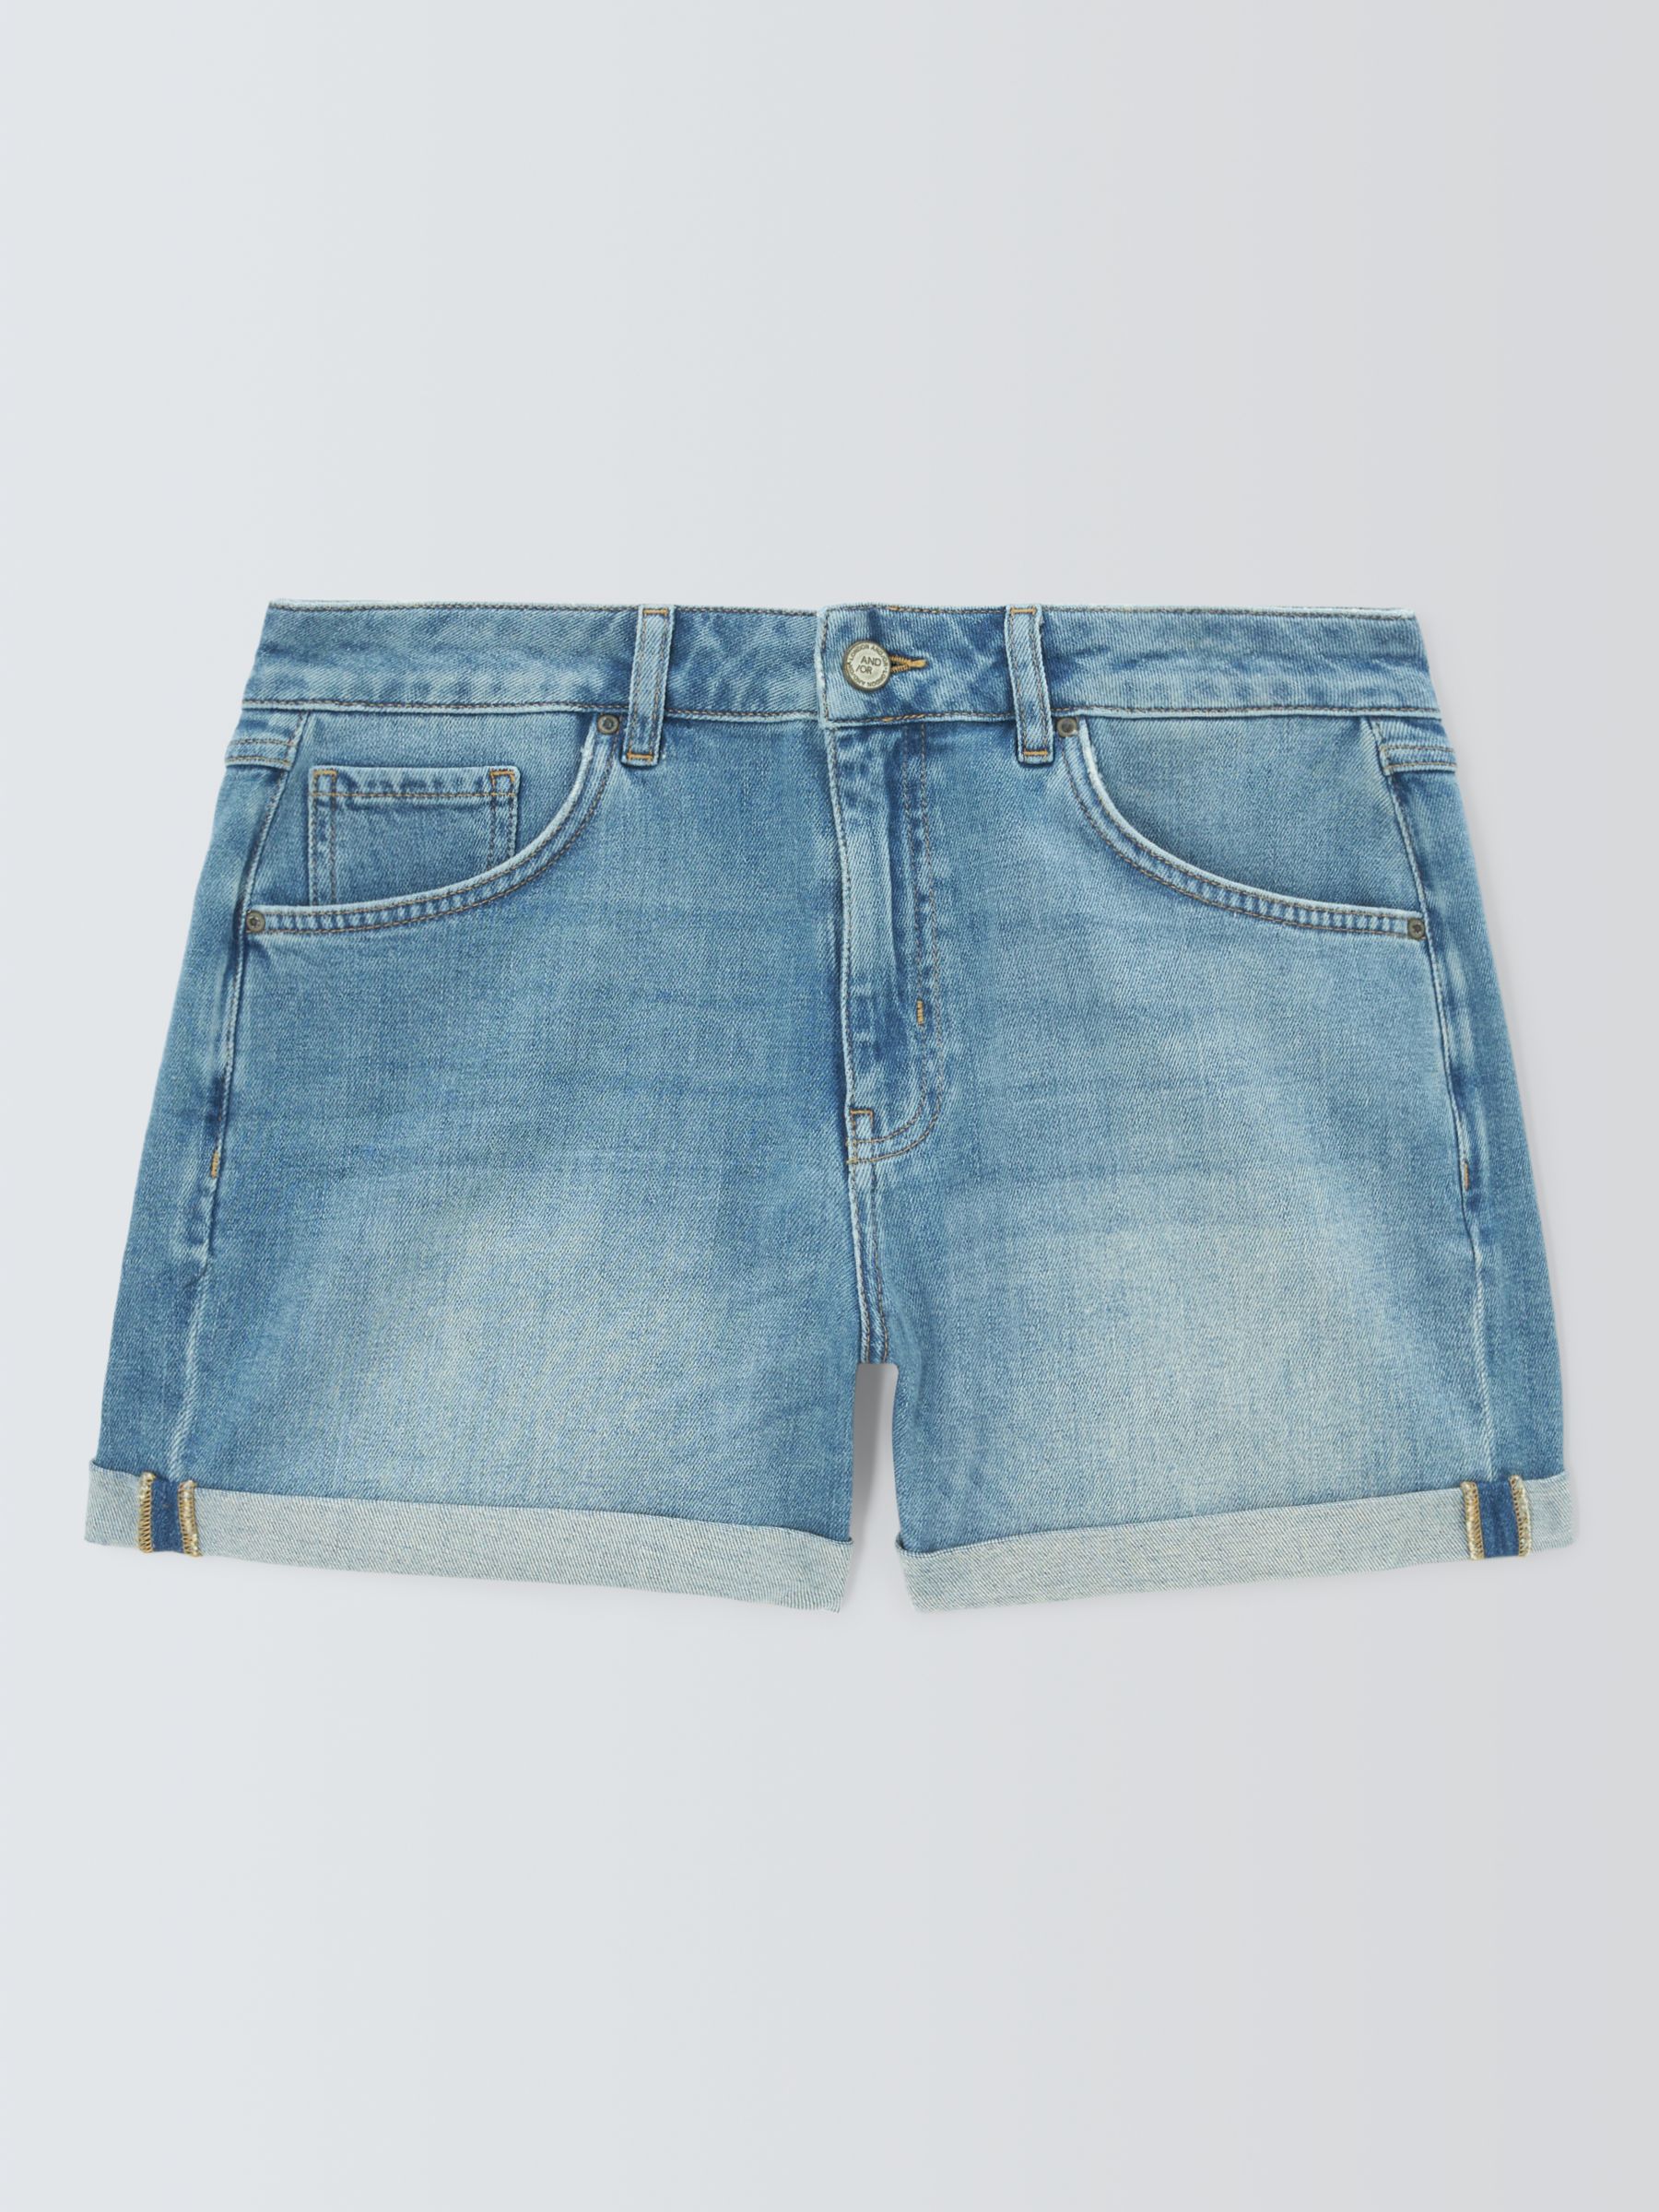 AND/OR Sunset Beach Denim Shorts, Mid Blue, 6